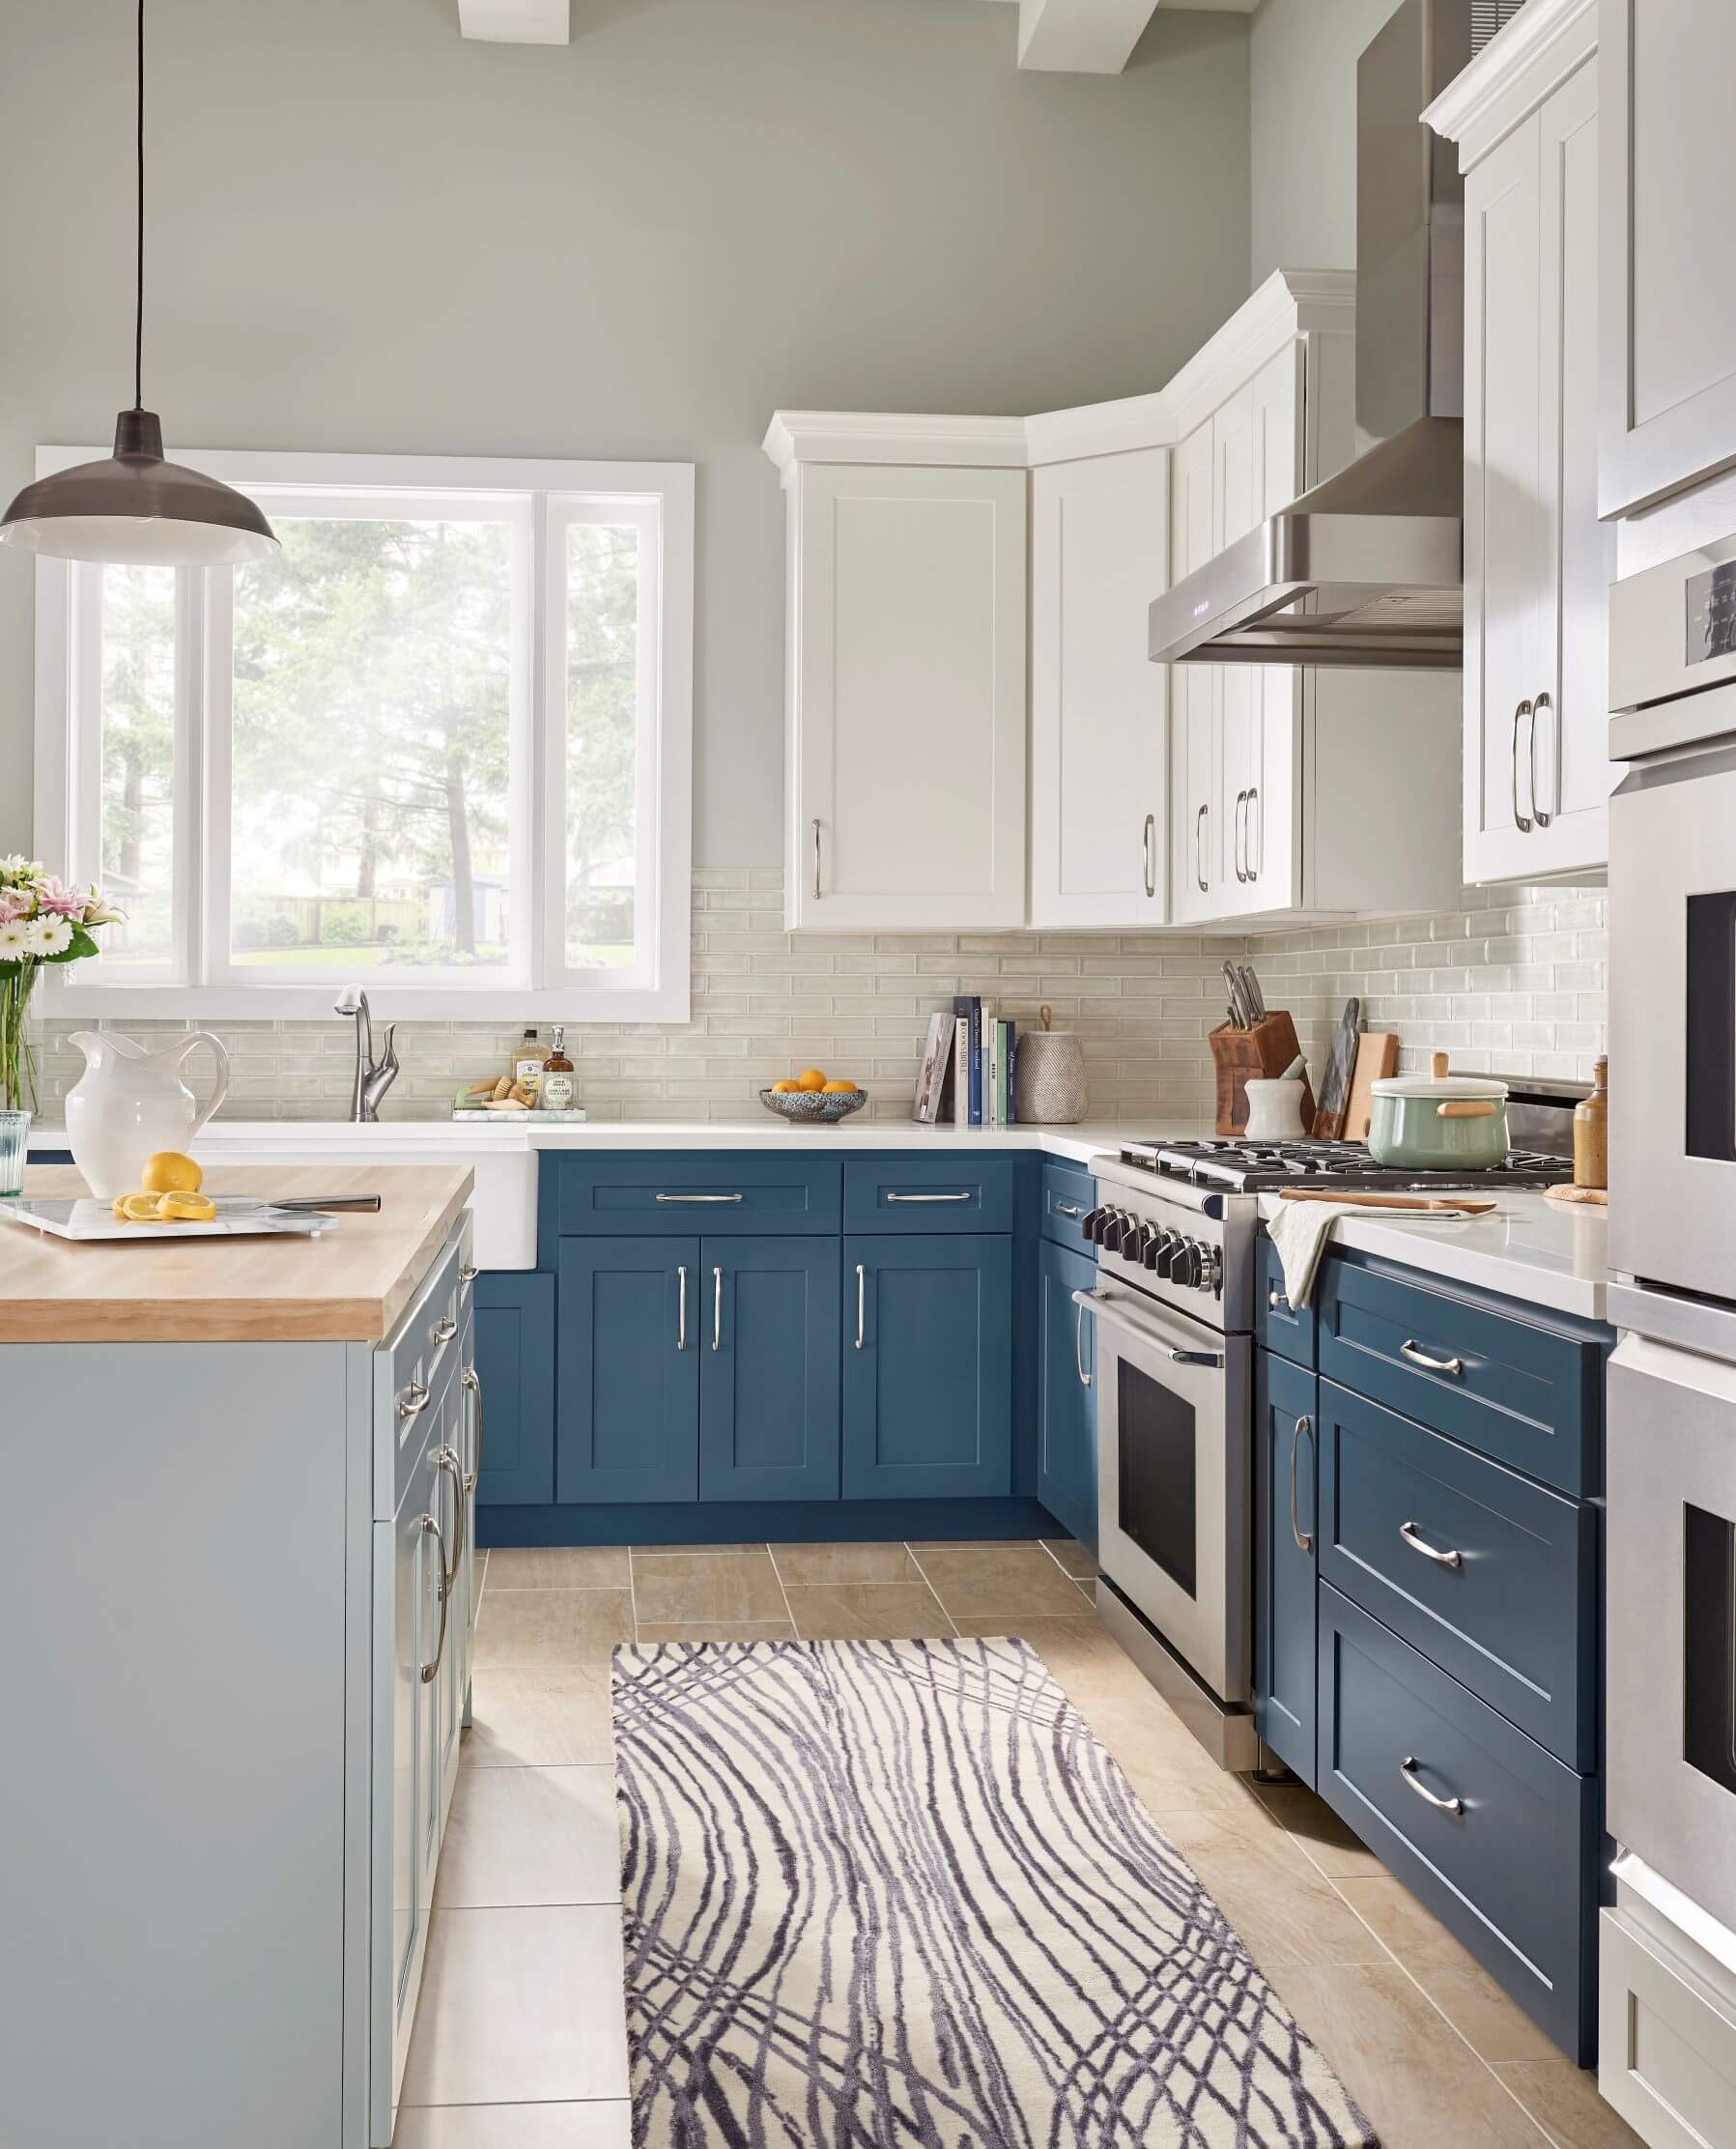 Pennsylvania Preassembled Kitchen Cabinets in dark blue, light blue, and white.